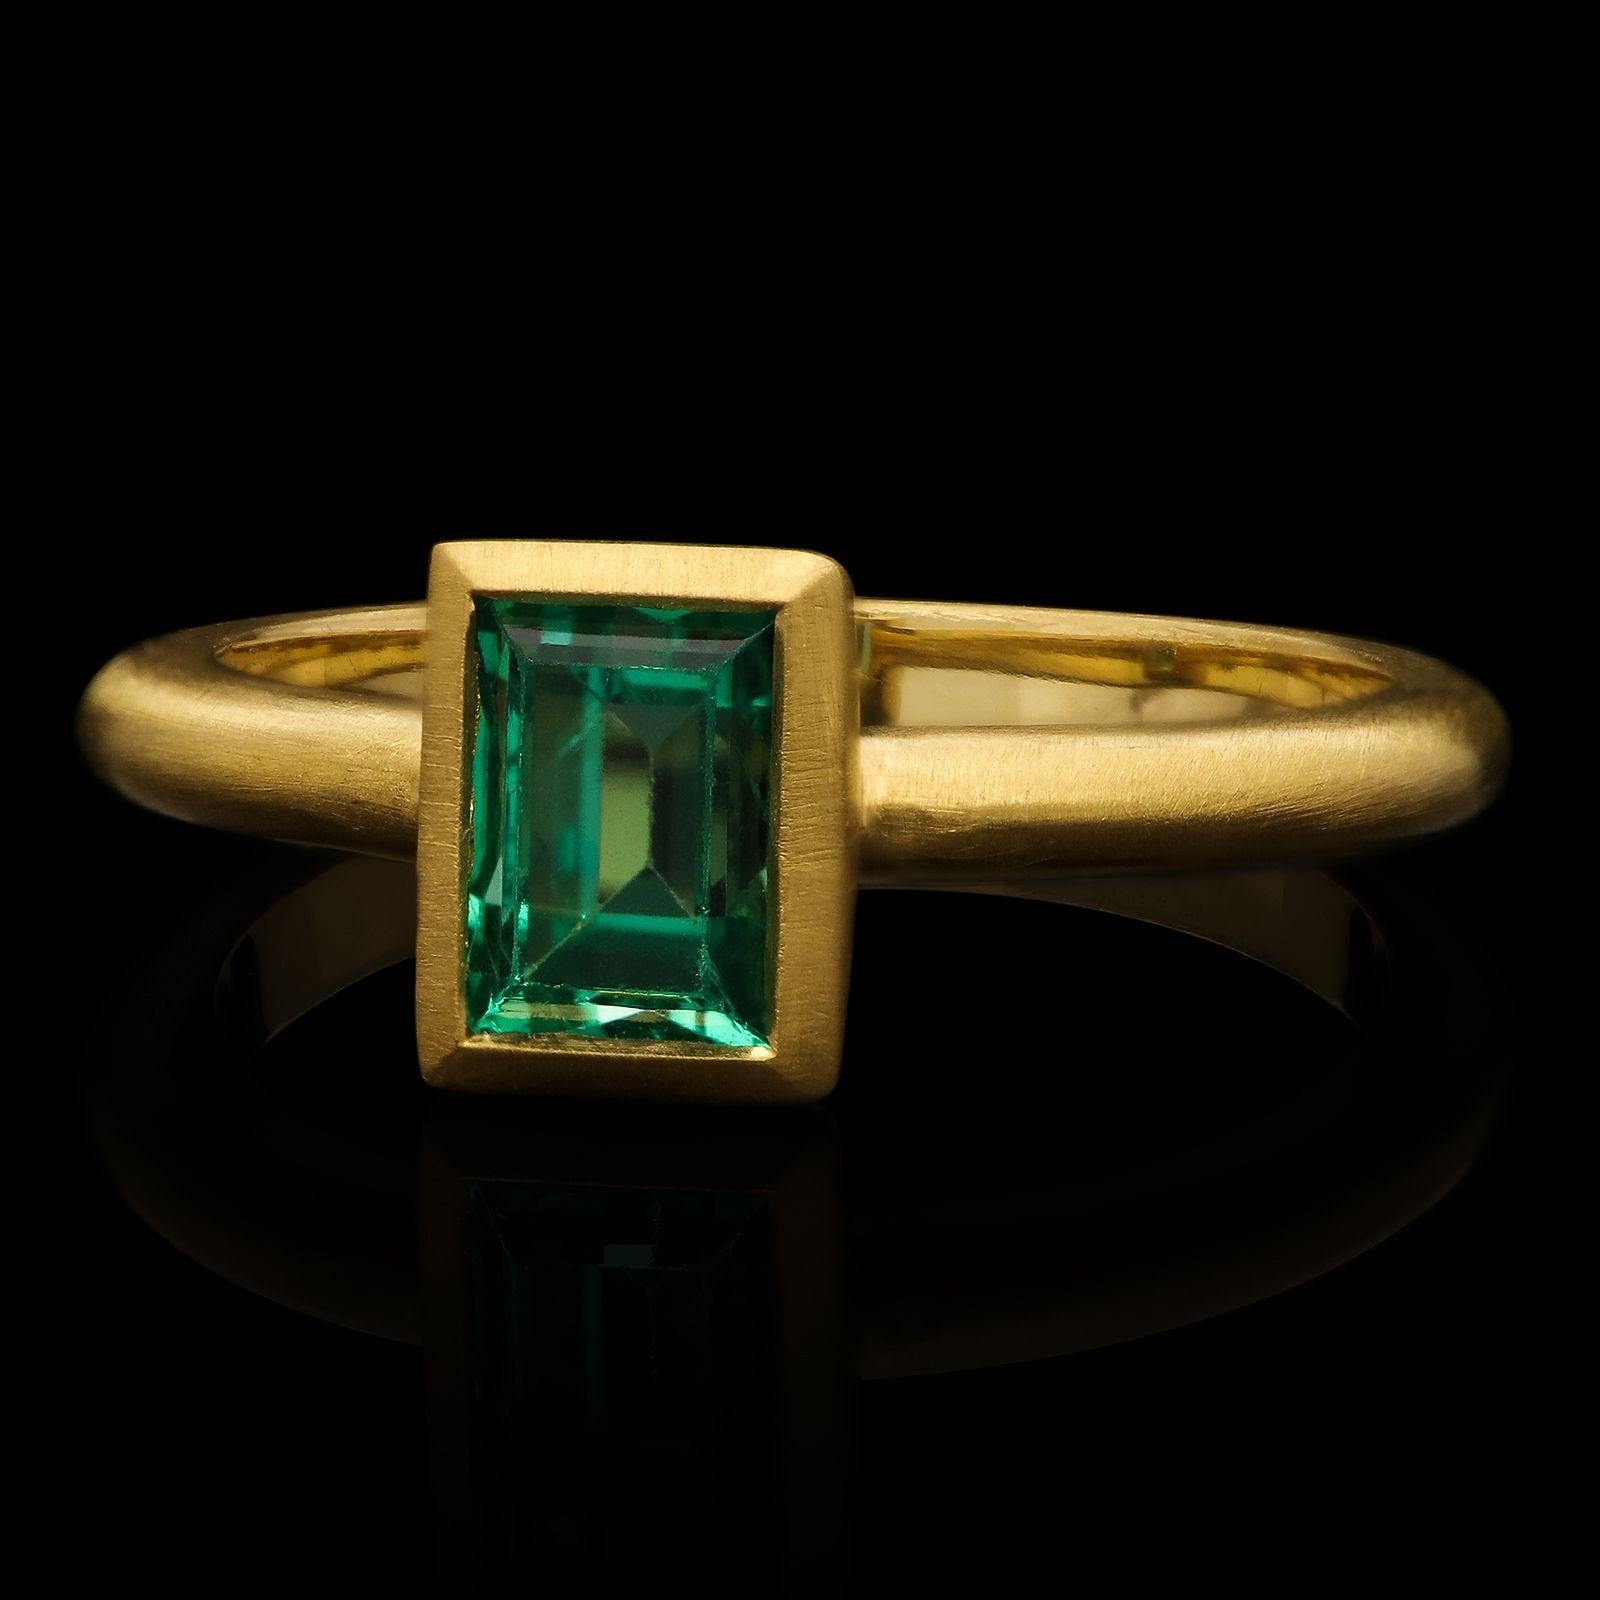 A striking emerald and yellow gold ring by Hancocks, centred with an old rectangular step cut Russian emerald weighing 1.56ct and with no oil treatment, bezel set within a finely hand crafted 22ct yellow gold mount with knife edge band and softly